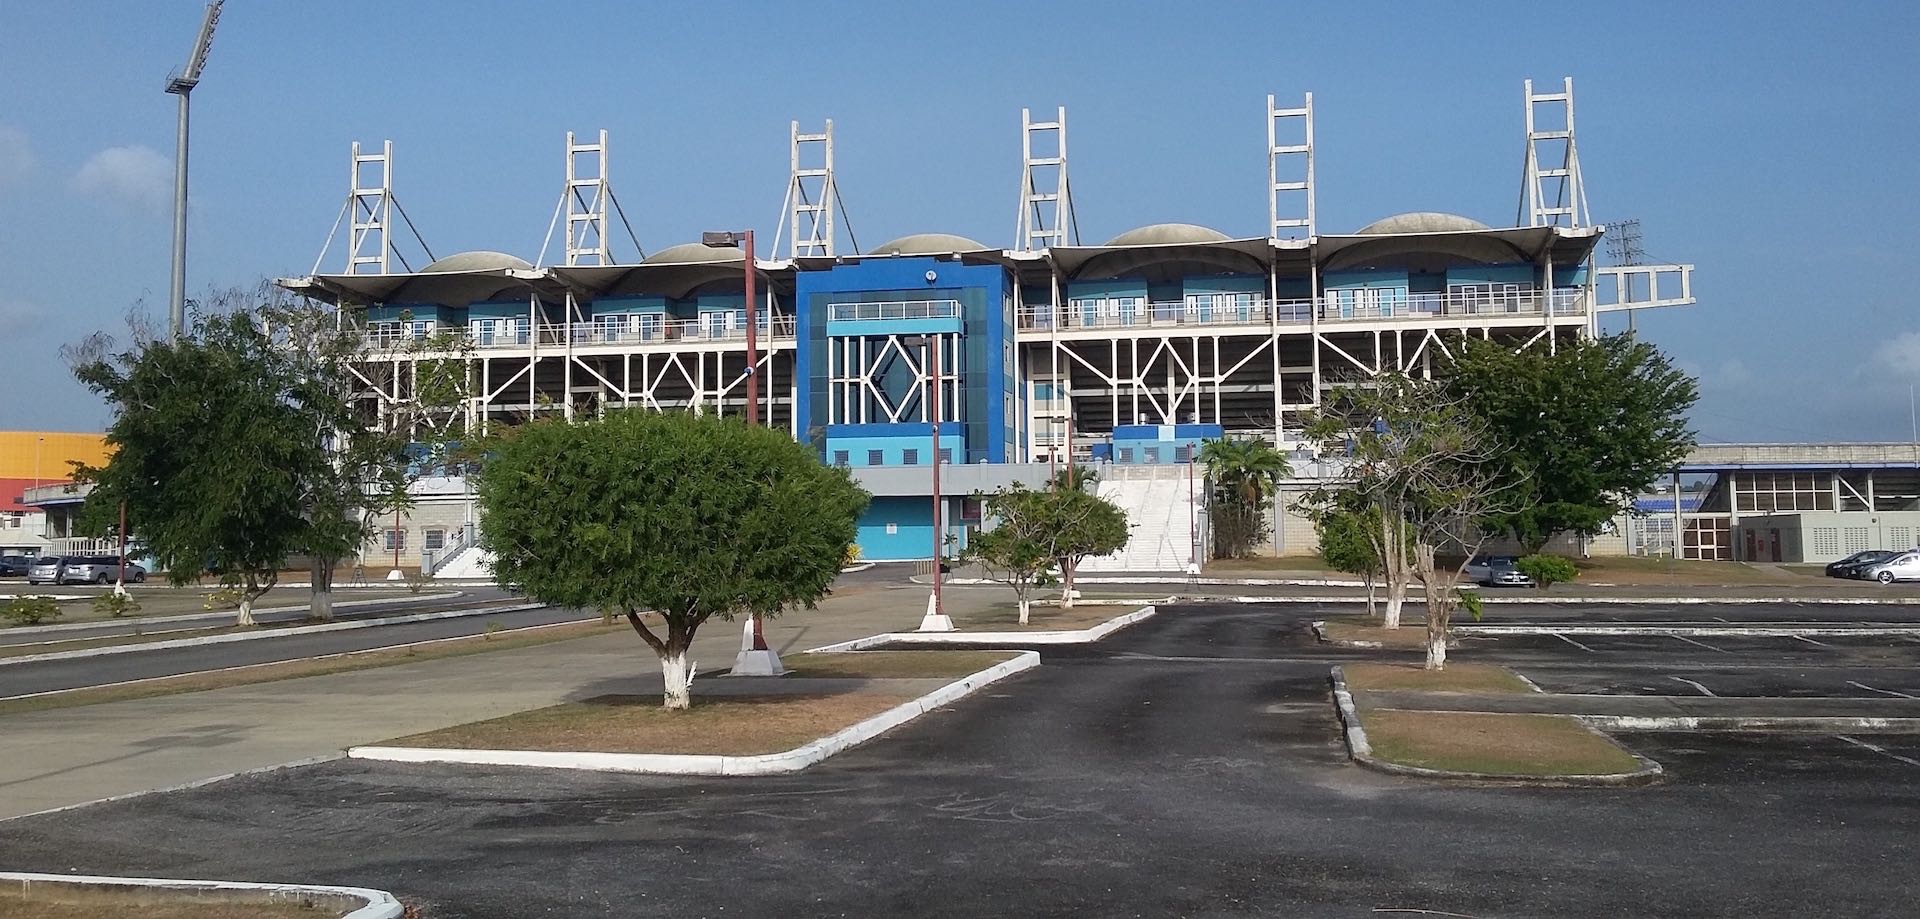 Venue concerns for T&T/Guyana clash.